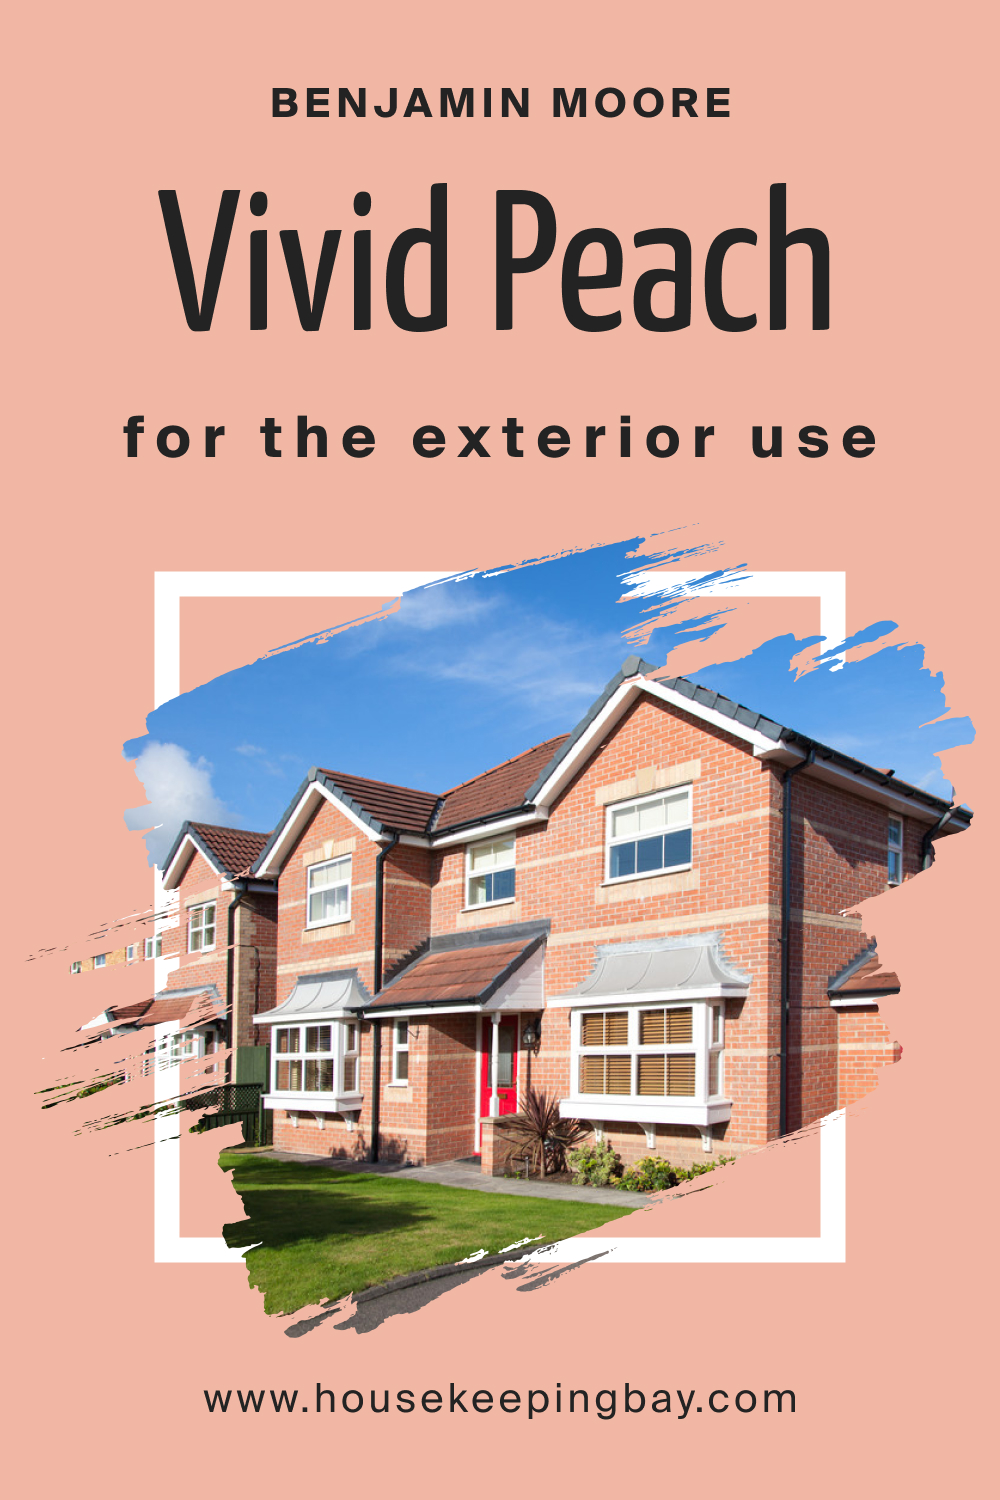 Benjamin Moore. Vivid Peach 025 for the Exterior Use